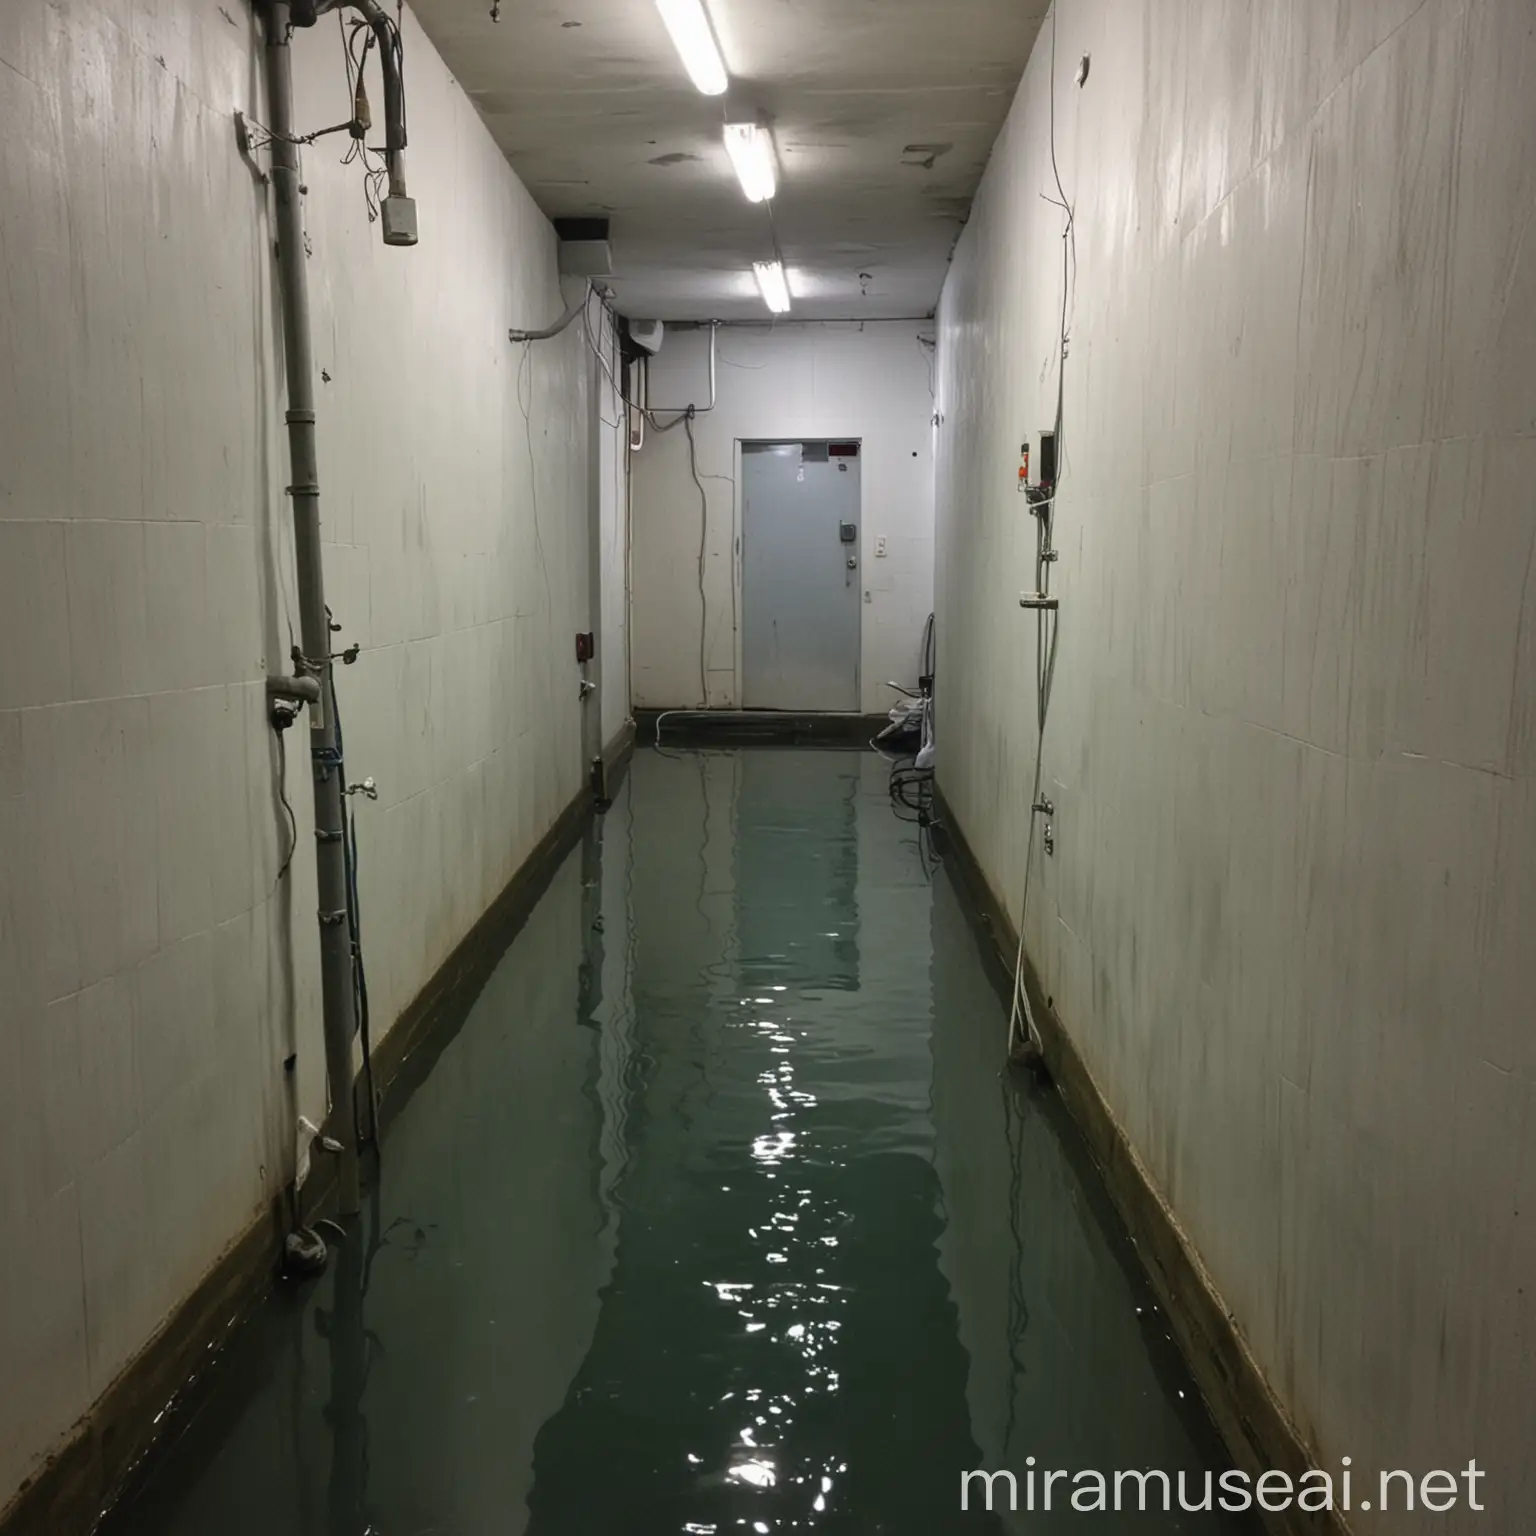 a backroom with water and a uneasy feeling